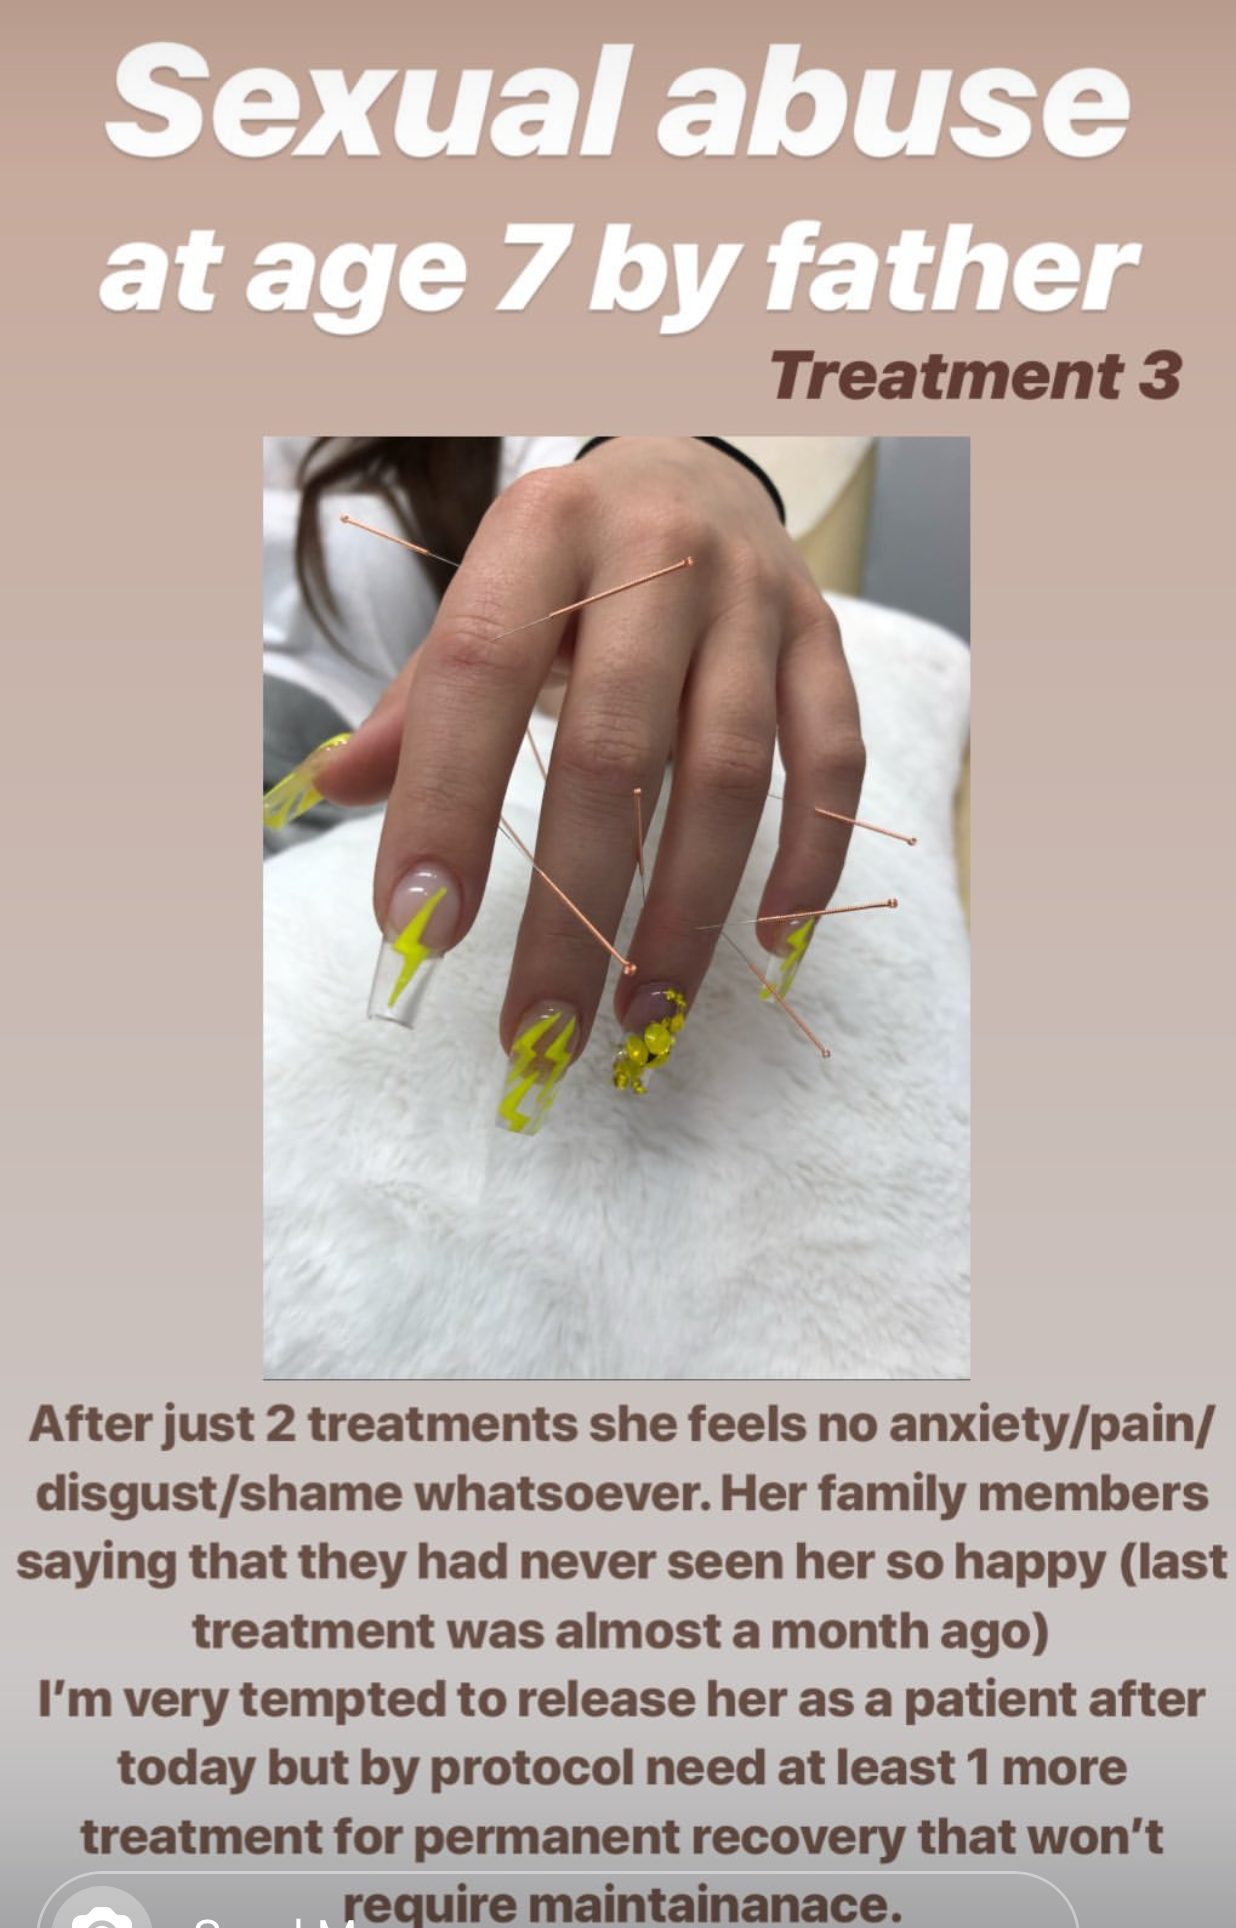  SuJok acupuncture in Vancouver used for treating mental health. Patient received treatment for going through sexual abuse, in this case she was raped by her father at age 7. Third treatment involved continuation of growth and overcoming anxiety and 